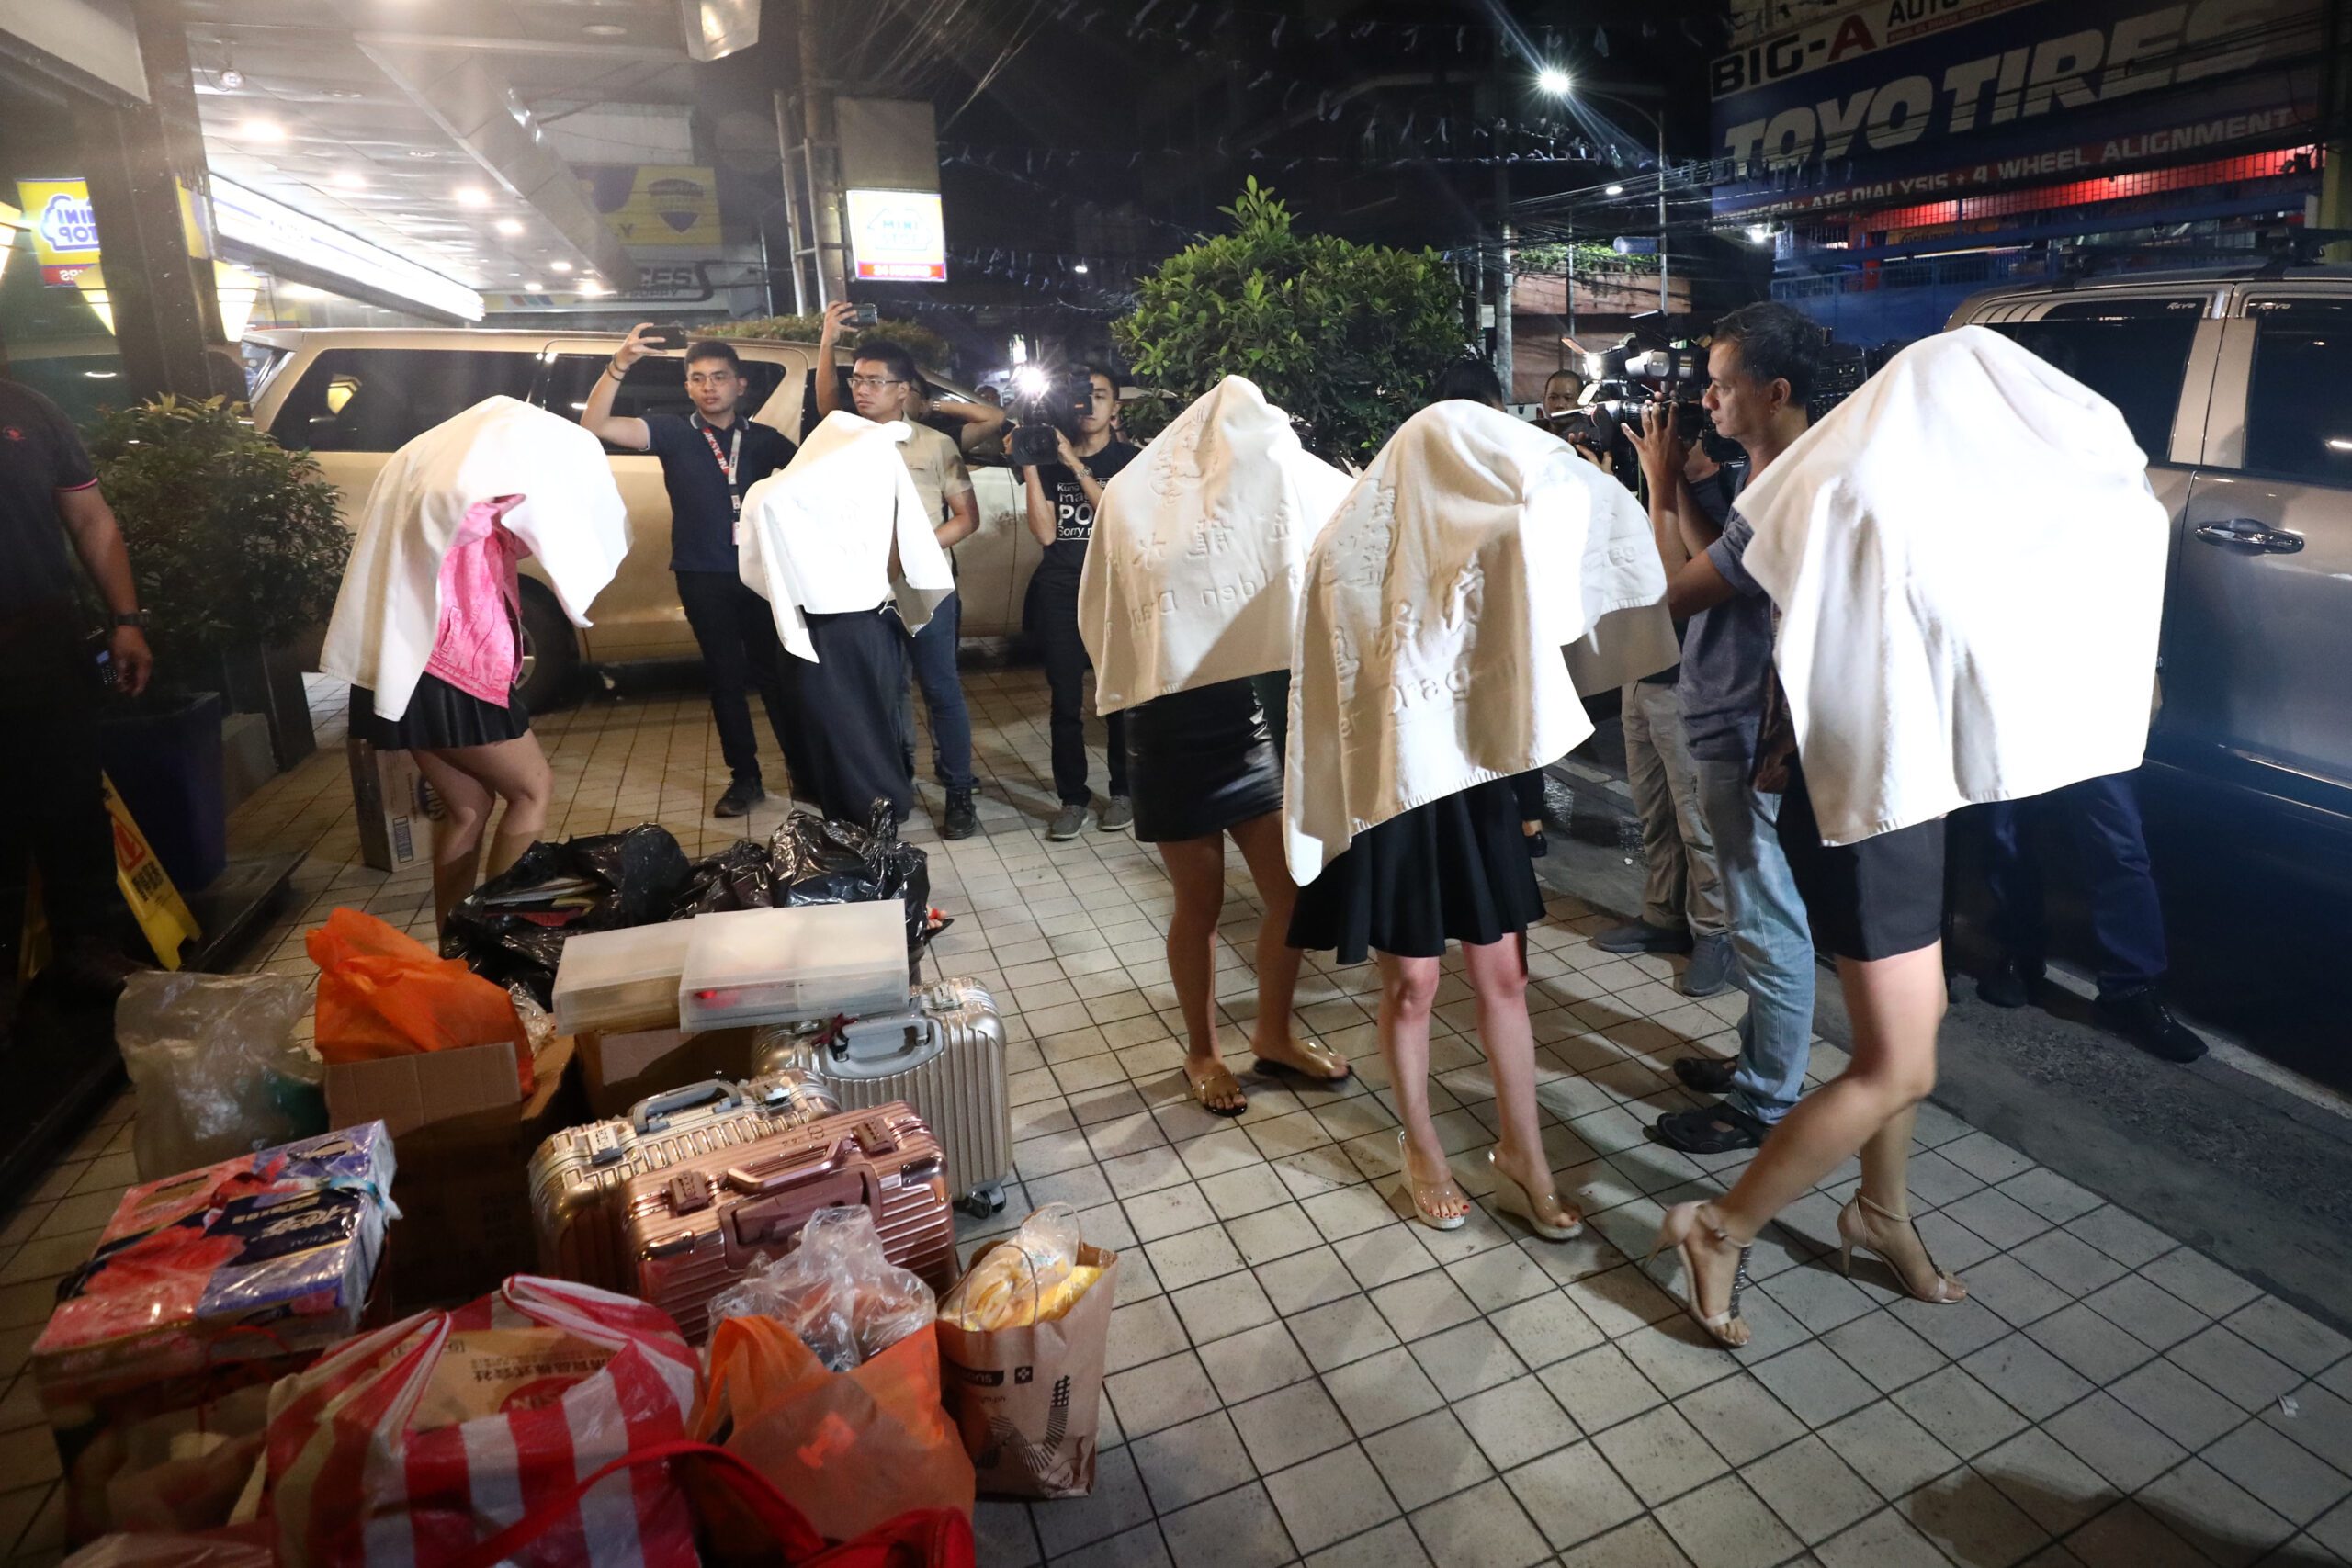 13 foreign women rescued from ‘prostitution den’ in Makati